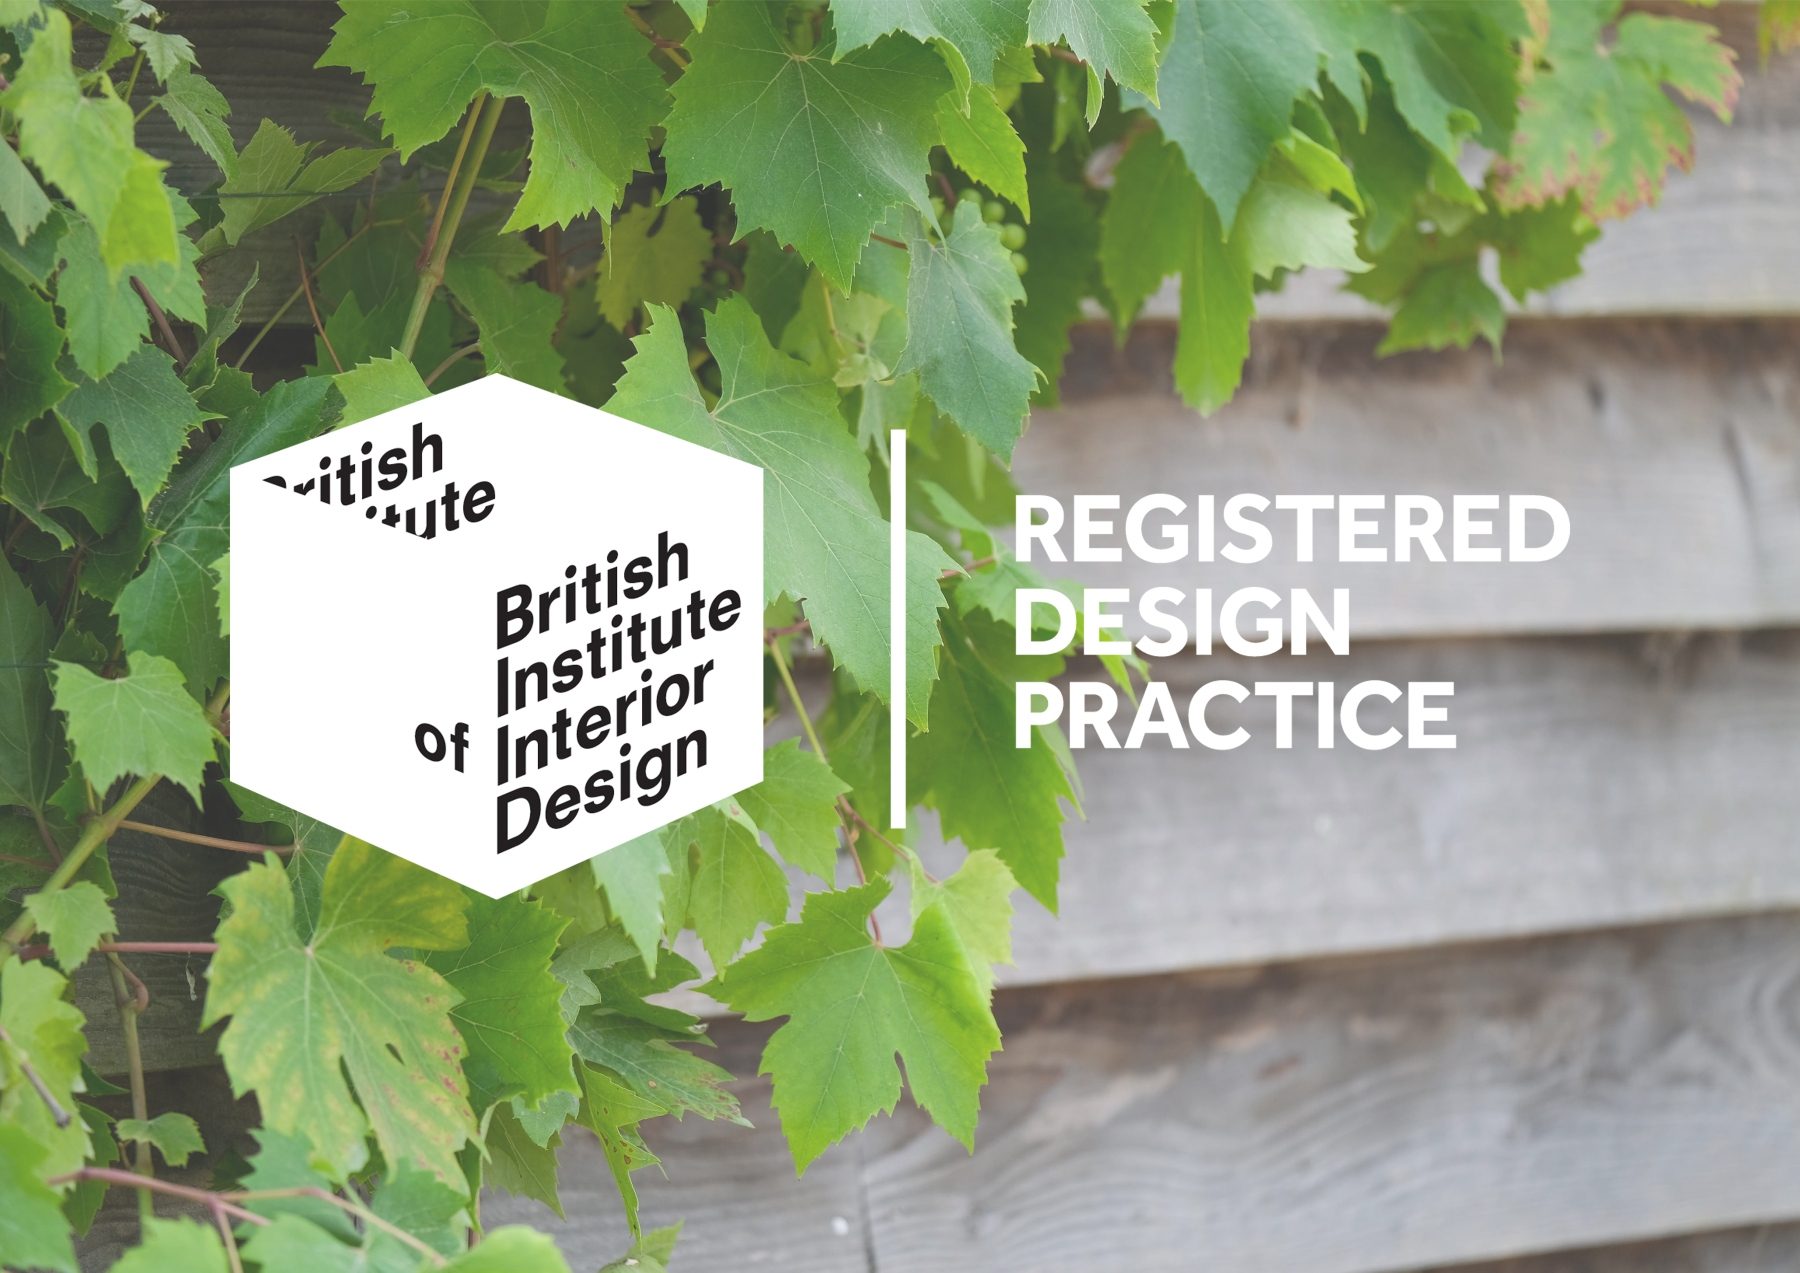 BIID Registered Design Practice logo overlayed on a grape vine climbing up wood cladding